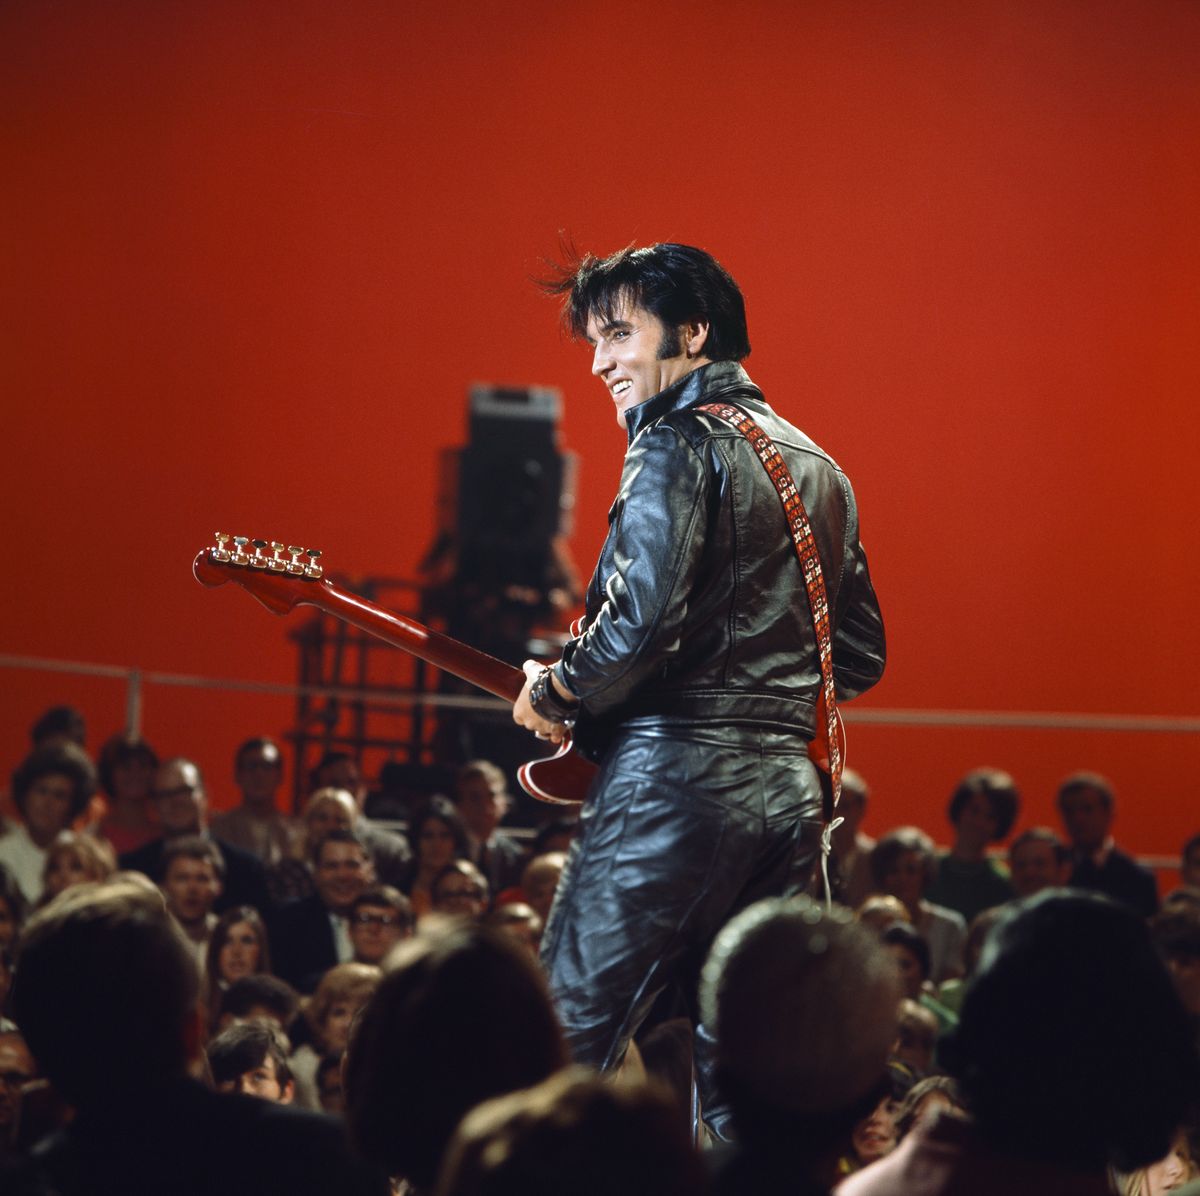 https://hips.hearstapps.com/hmg-prod/images/pictured-elvis-presley-during-his-68-comeback-special-on-news-photo-1654618645.jpg?crop=0.989xw:1.00xh;0.00653xw,0&resize=1200:*